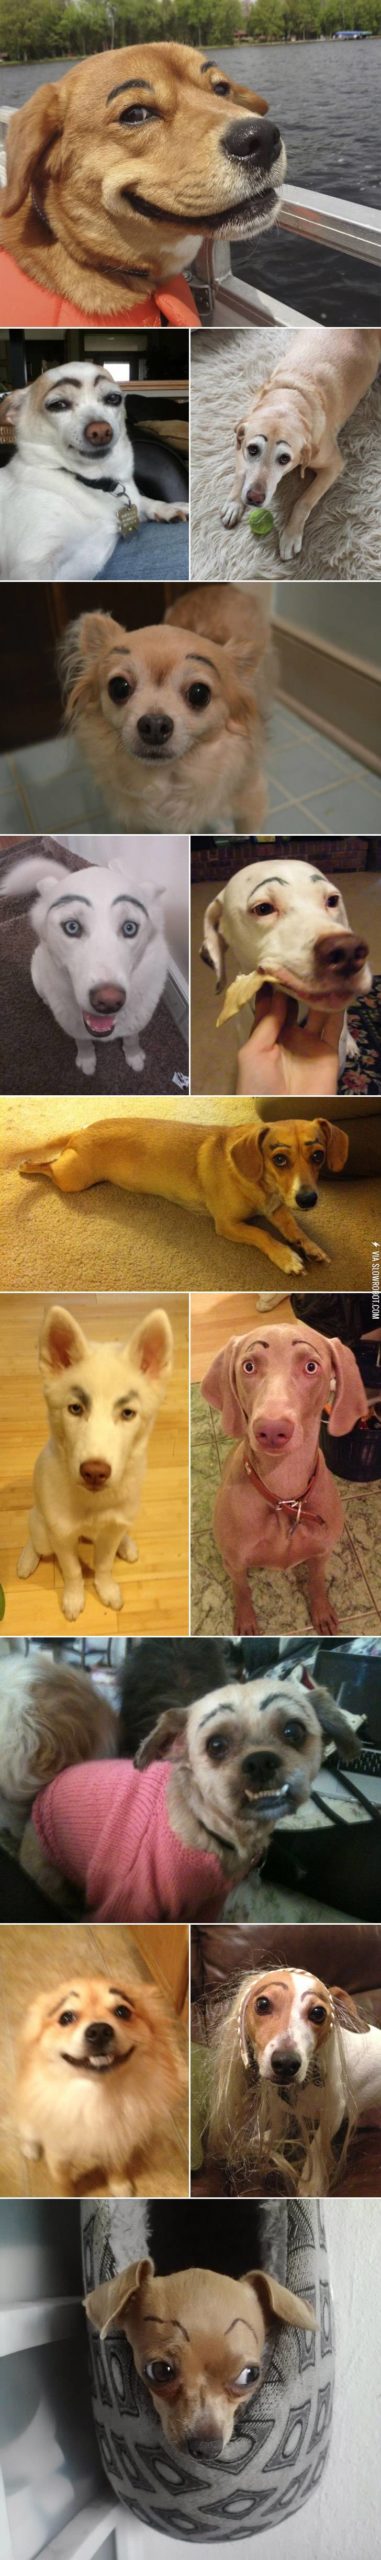 Dogs+with+eyebrows.